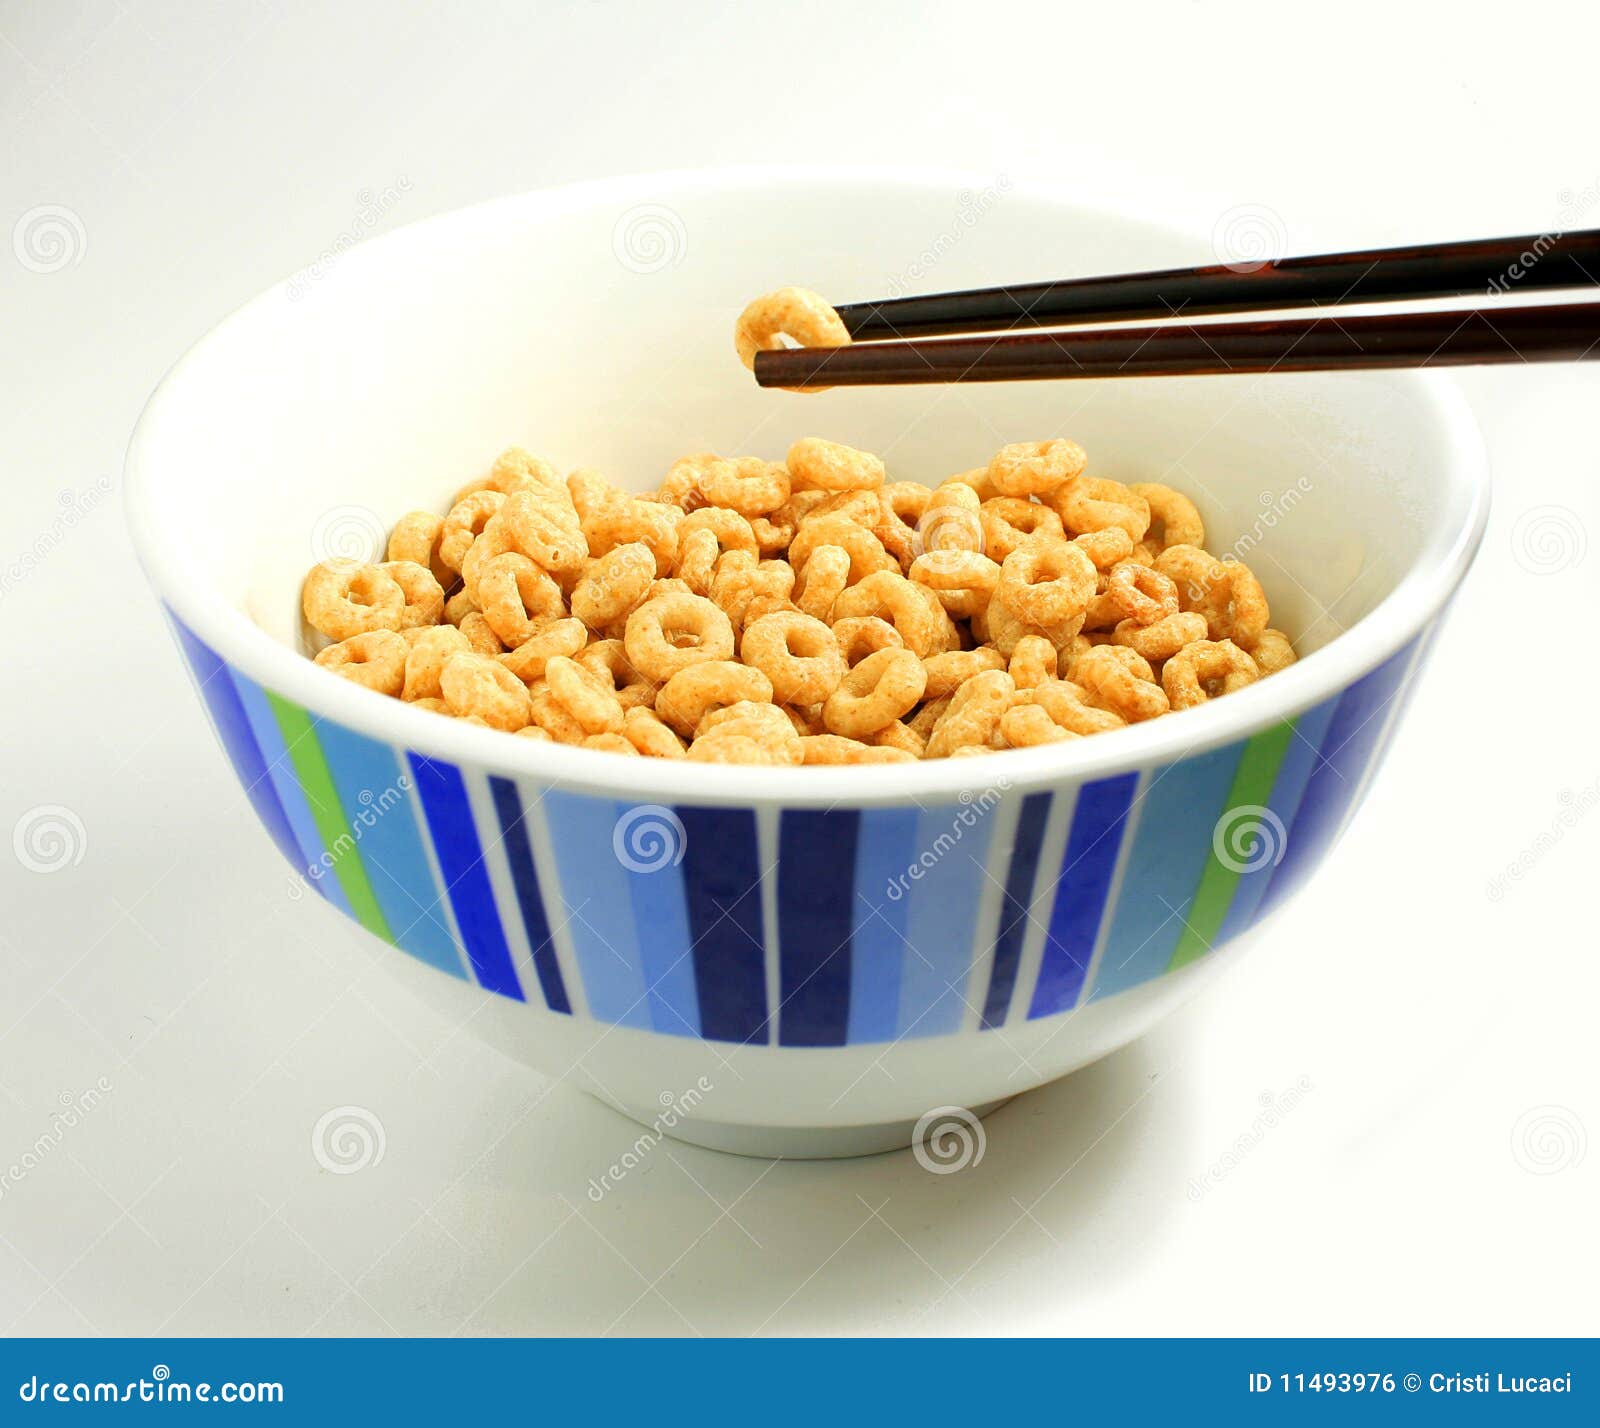 Asian Cereal 34